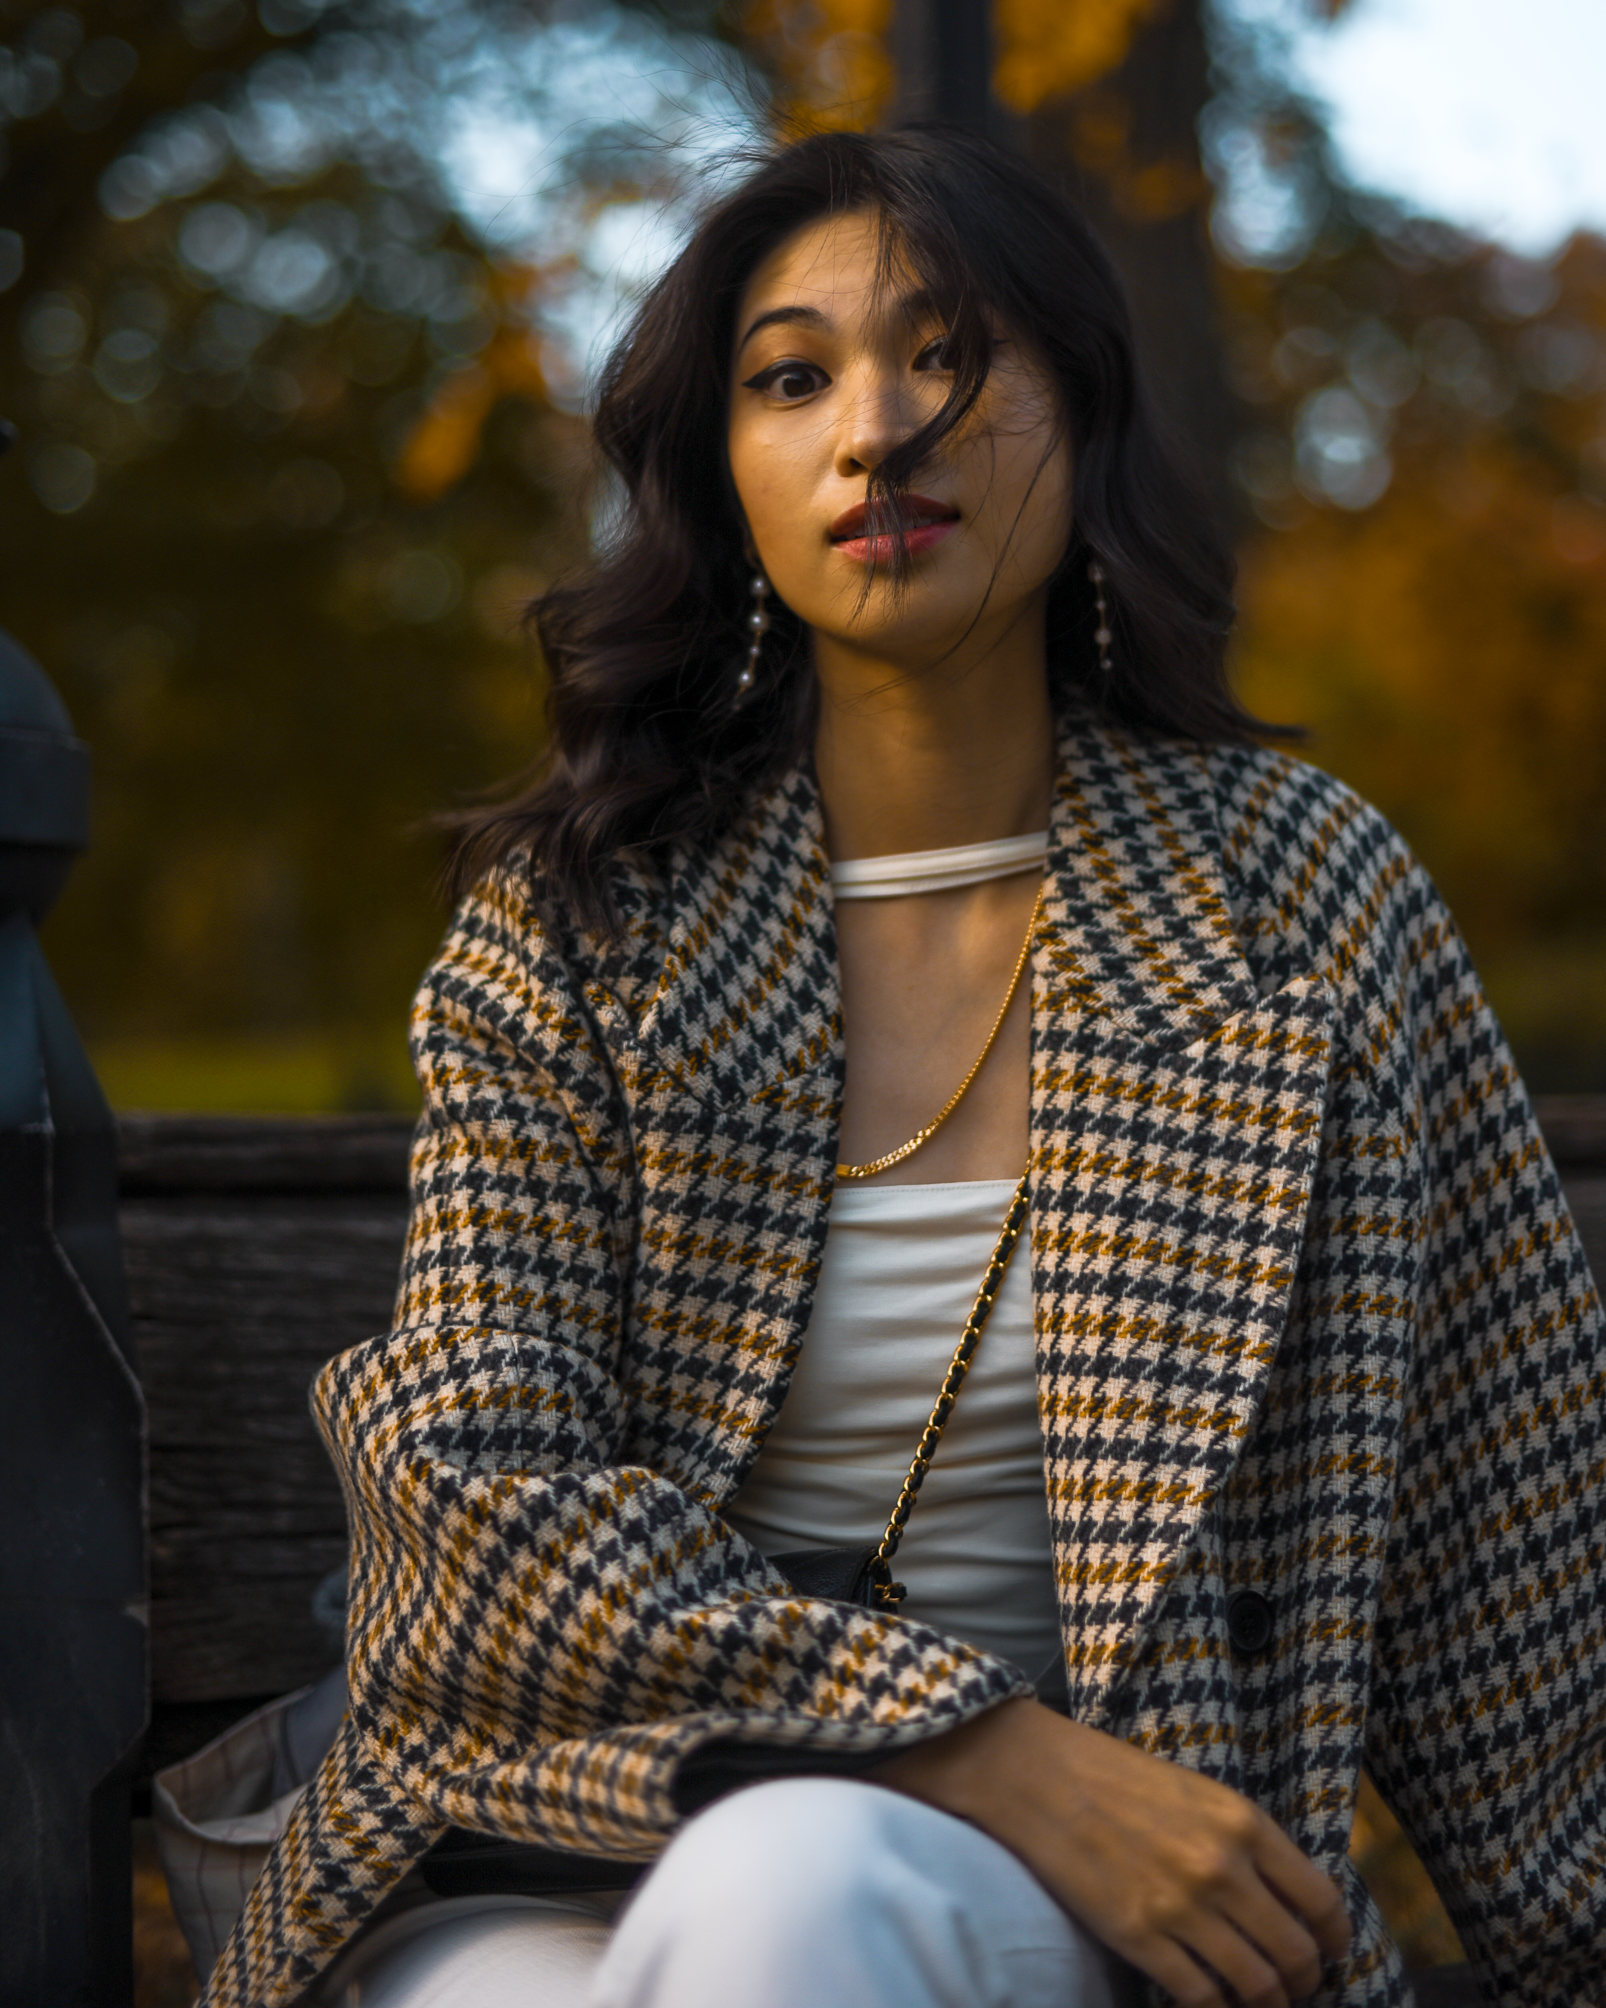 Fall plaid oversized coat, beige outfit ideas for fall, Aritzia Wilfred Prescott Wool Coat, fall style in New York, Central Park fashion photo ideas - FOREVERVANNY.com